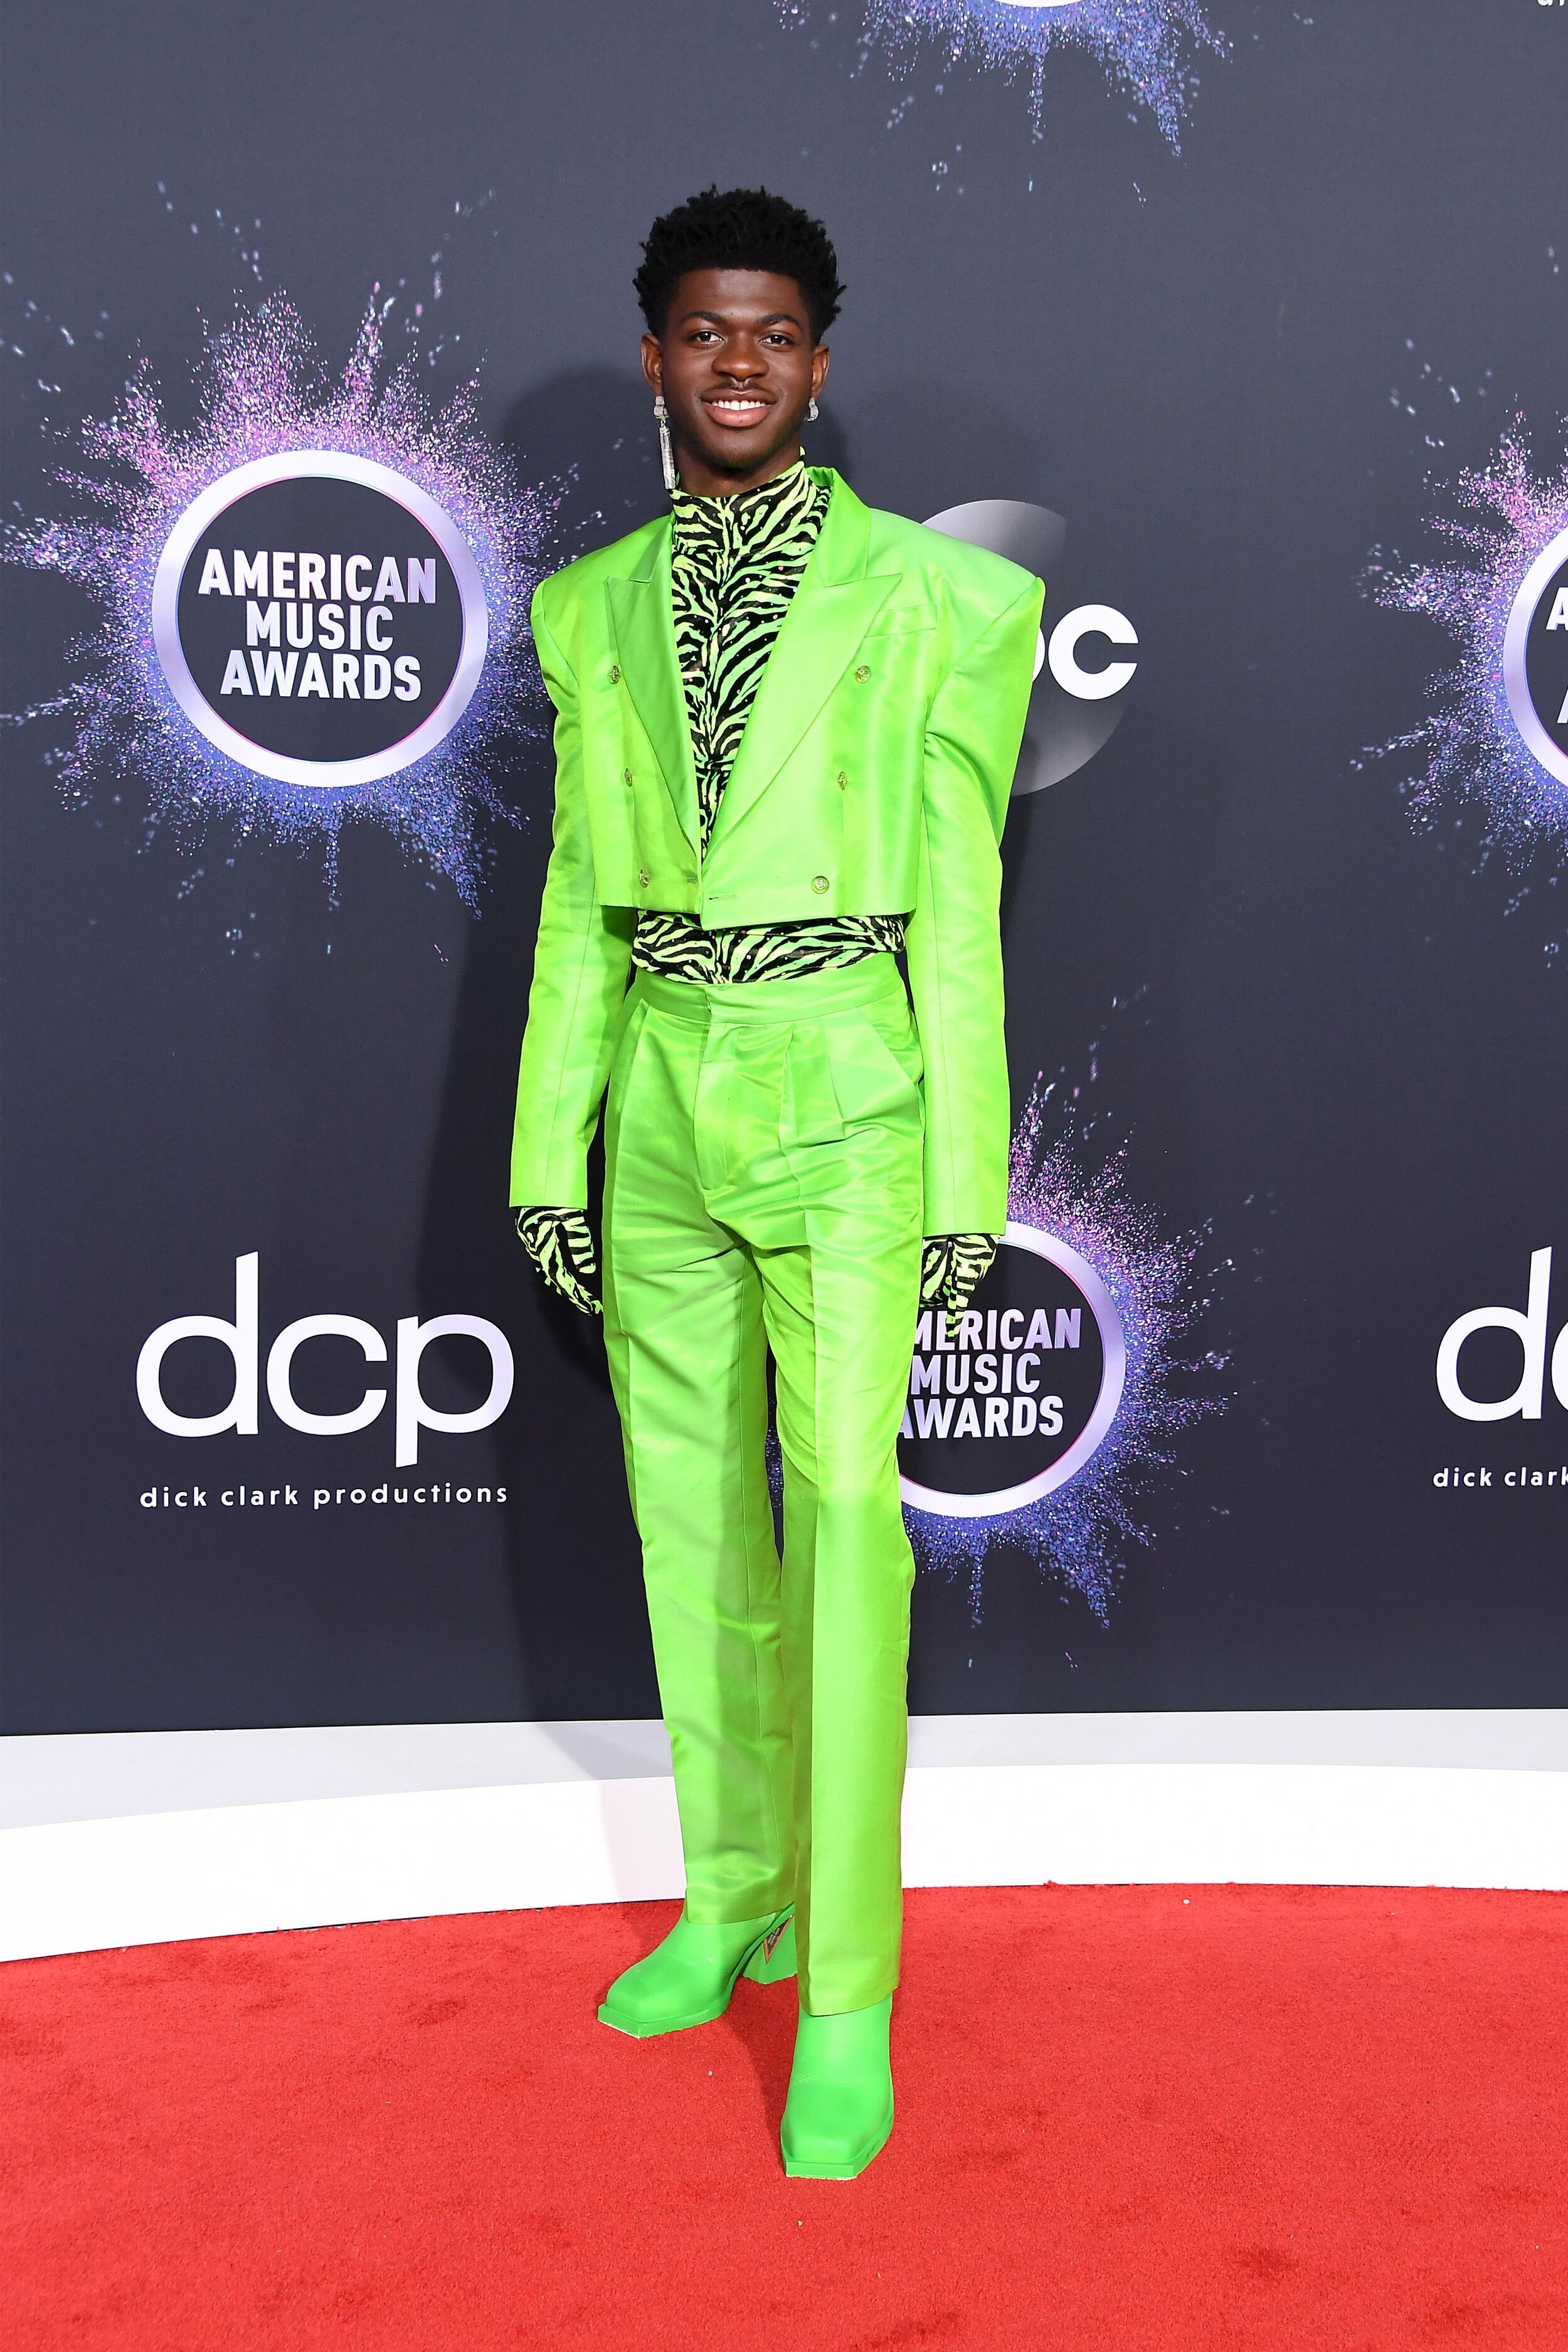 lil-nas-x-attends-the-2019-american-music-awards-at-news-photo-1576797500.jpg